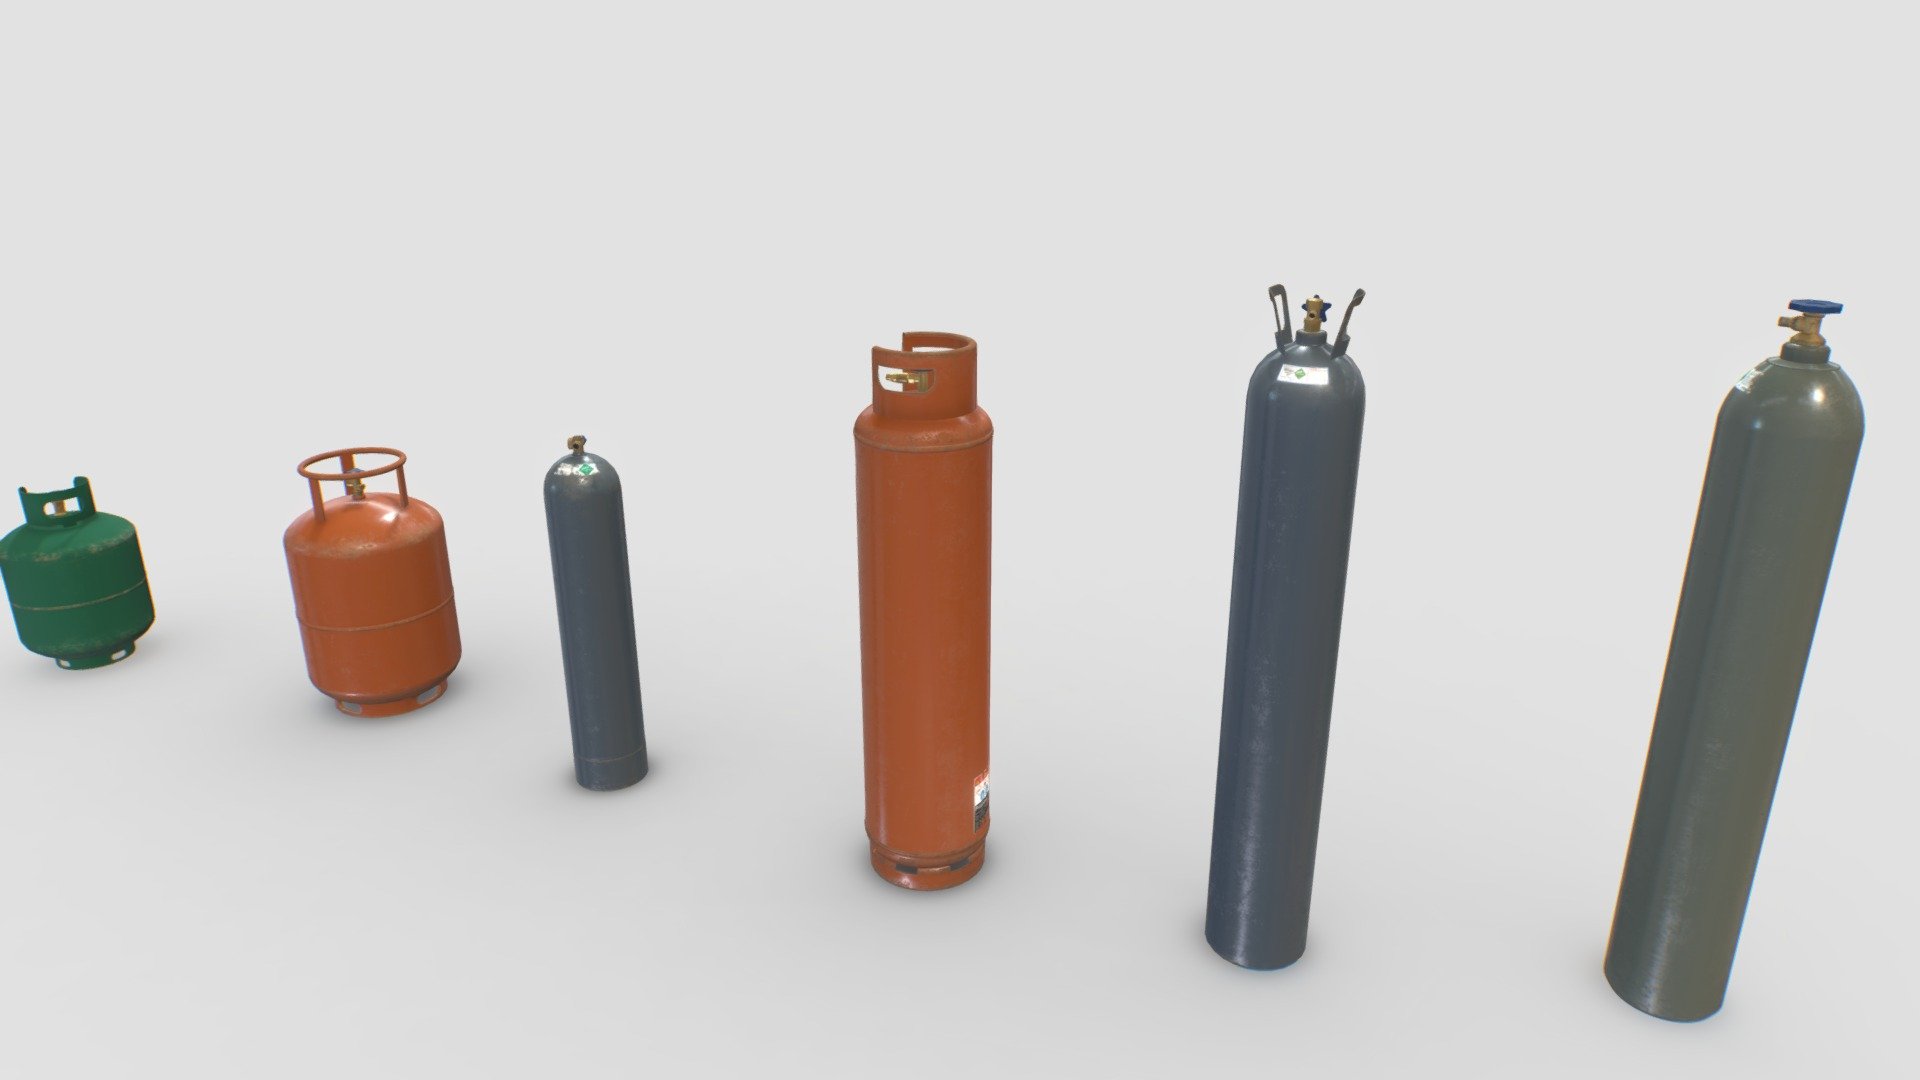 Pack of 6 industrial gas container tanks. Oxygen, hydrogen and propane cylinders.

PBR 4096px textures 4096px including albedo, normal, ao, roughness and metalness.

Real world scale.

Total of 13000 faces and 10000 vert (all pieces) 3d model